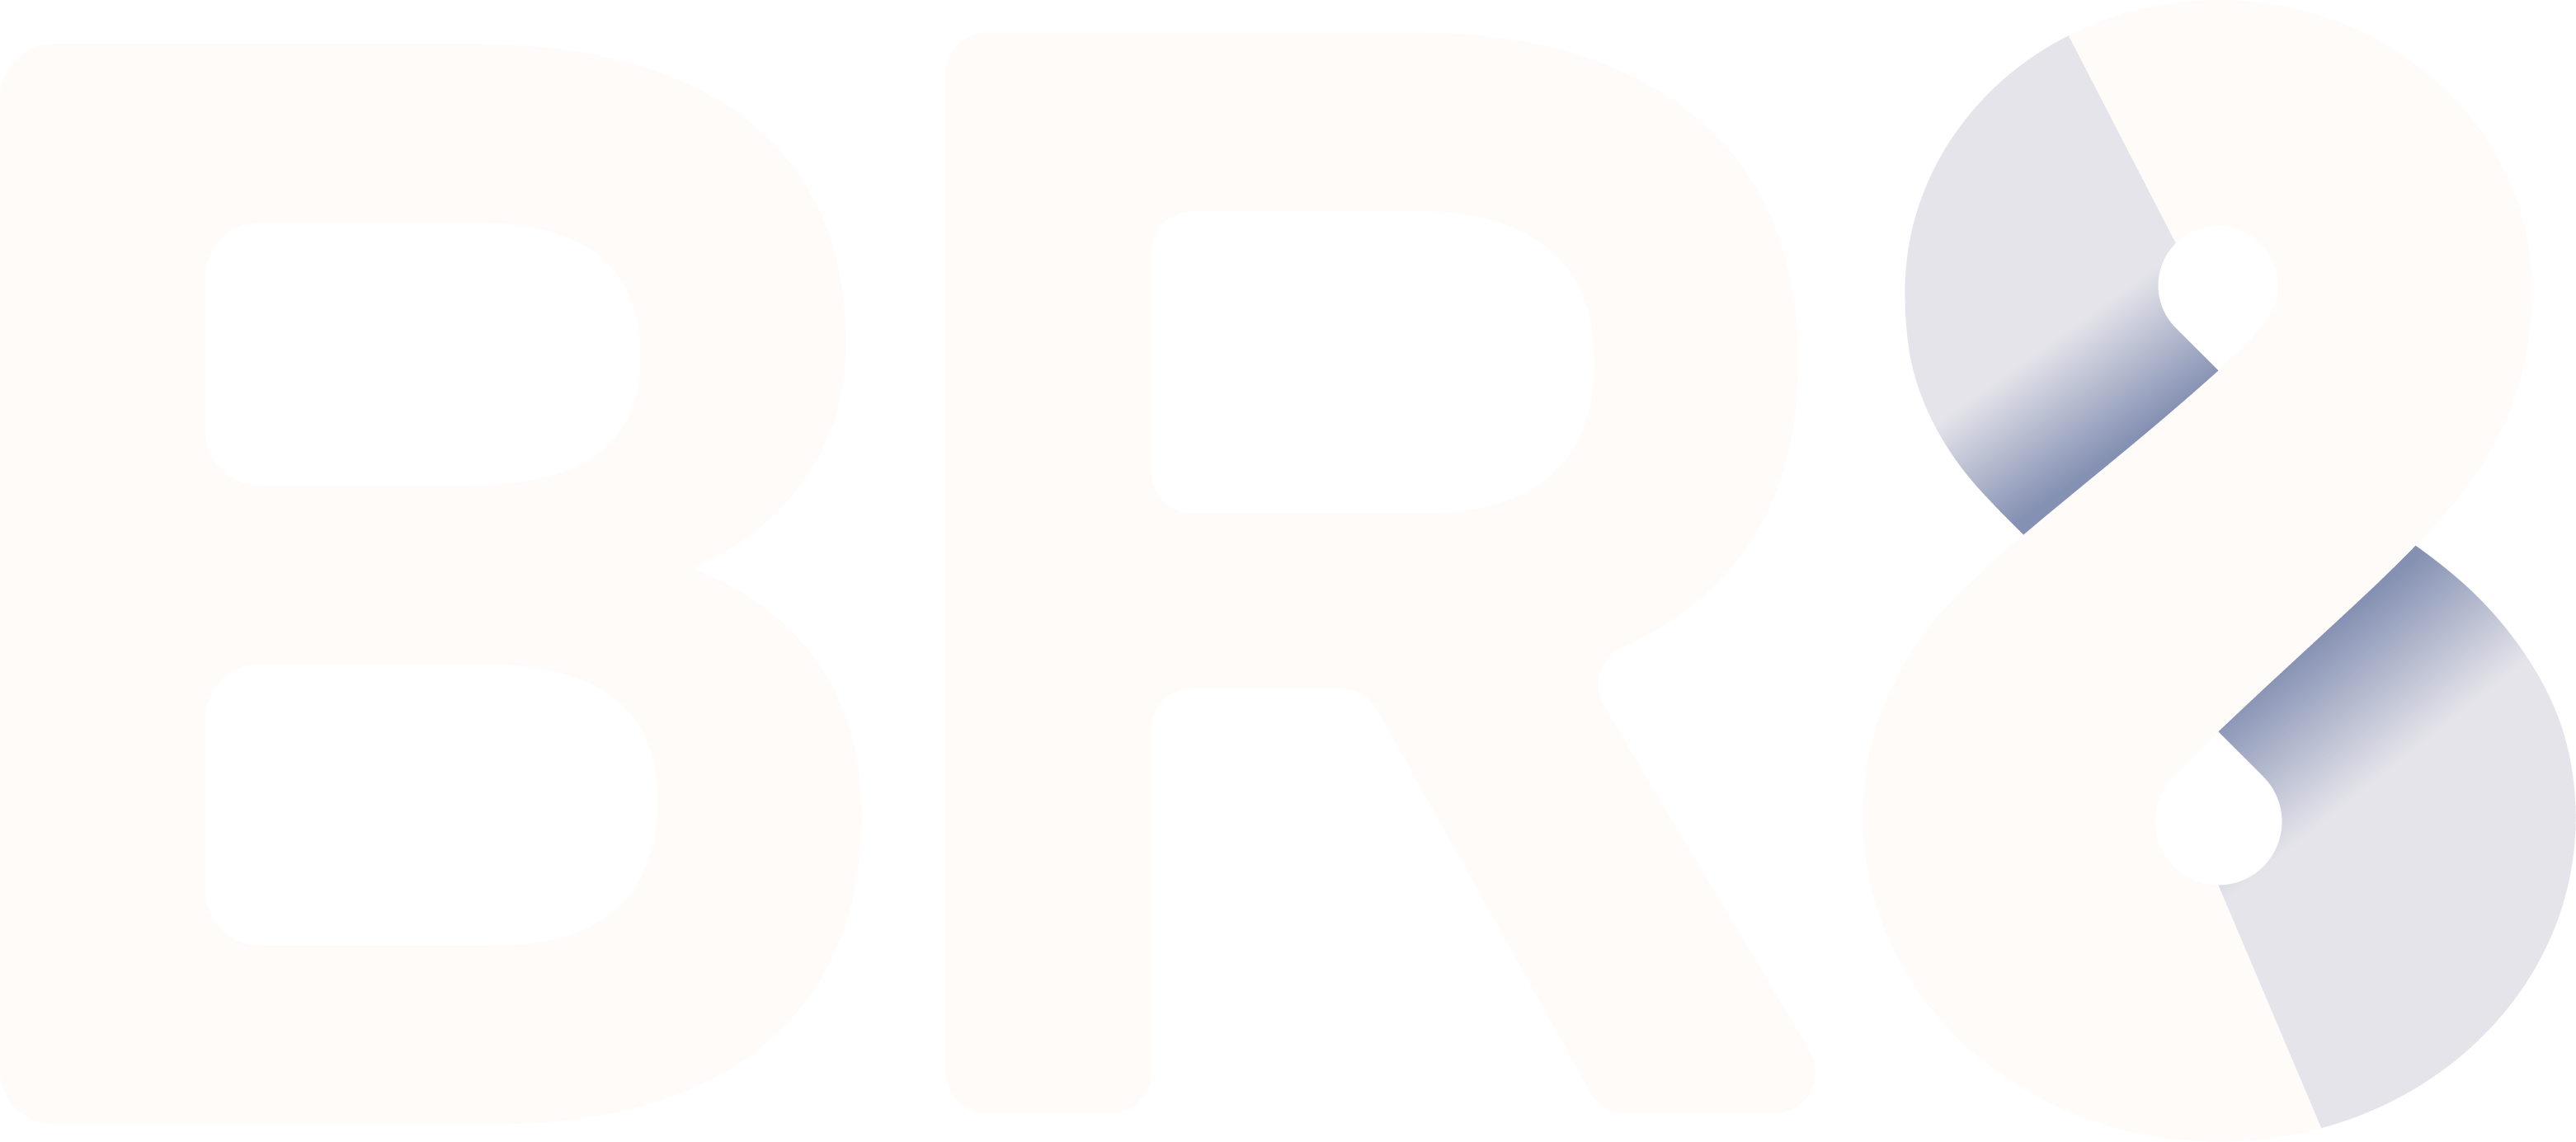 BR8